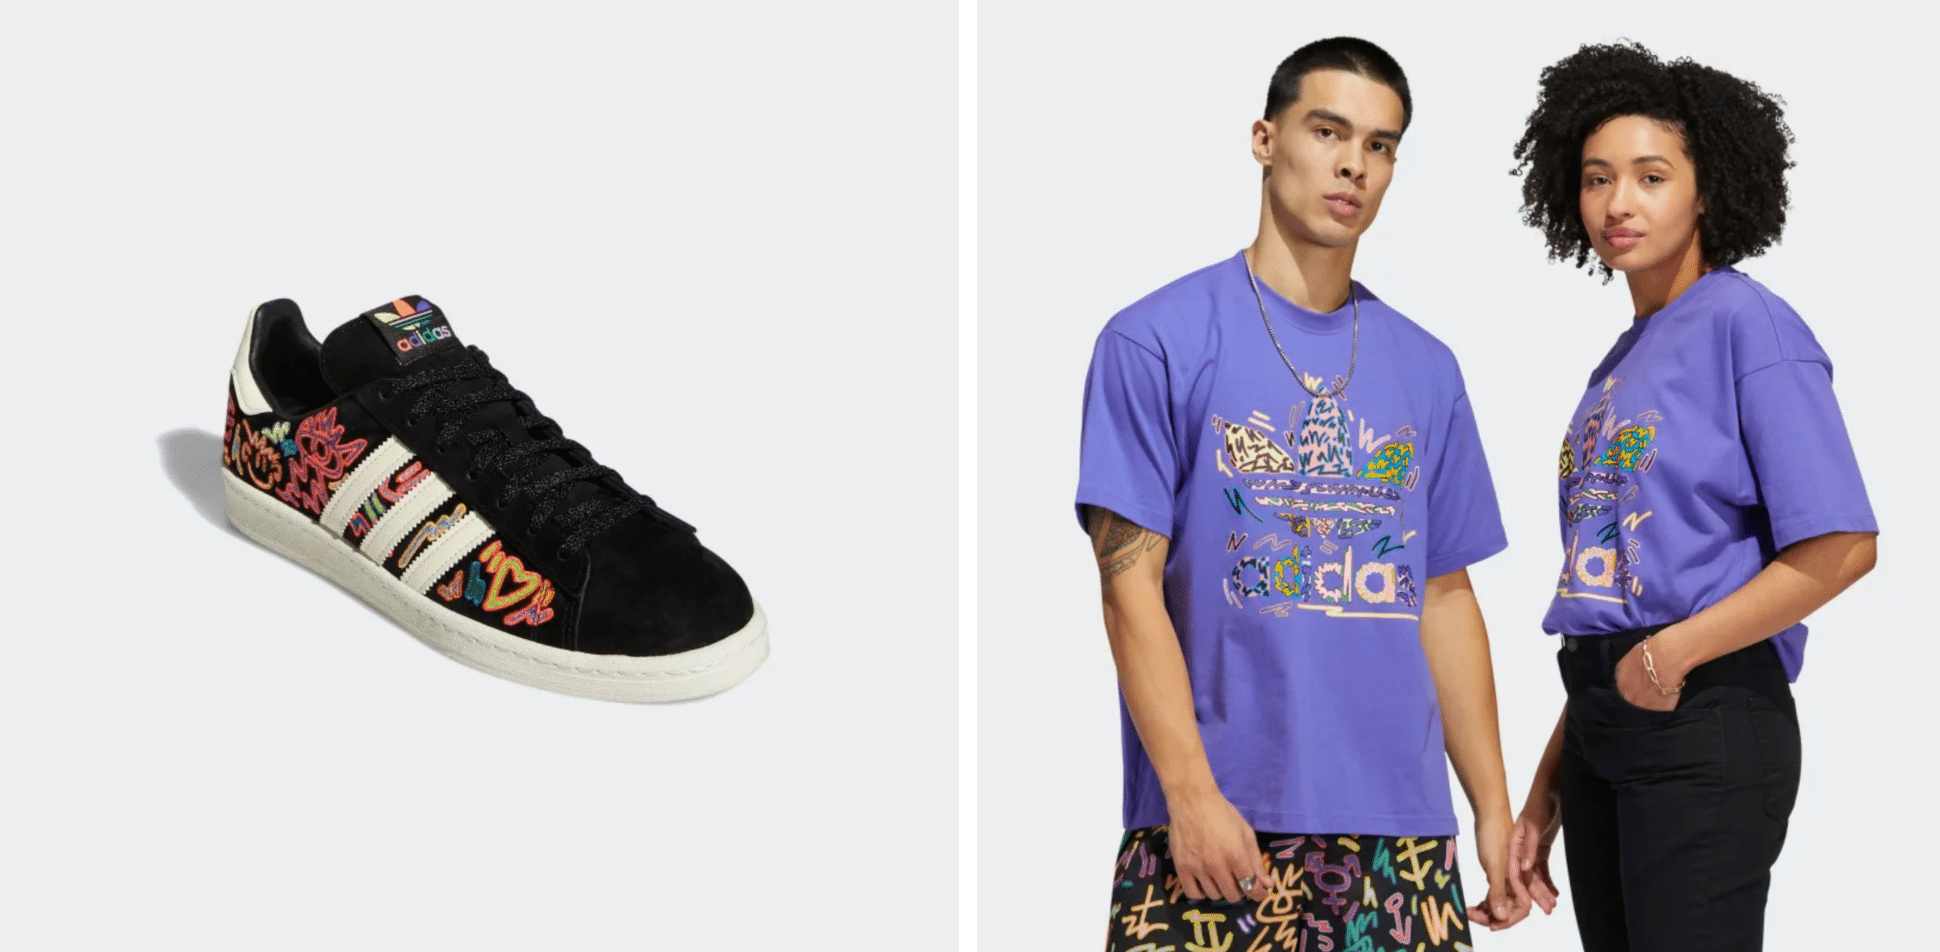 The Pride collection features apparel and limited edition trainers. (Adidas)